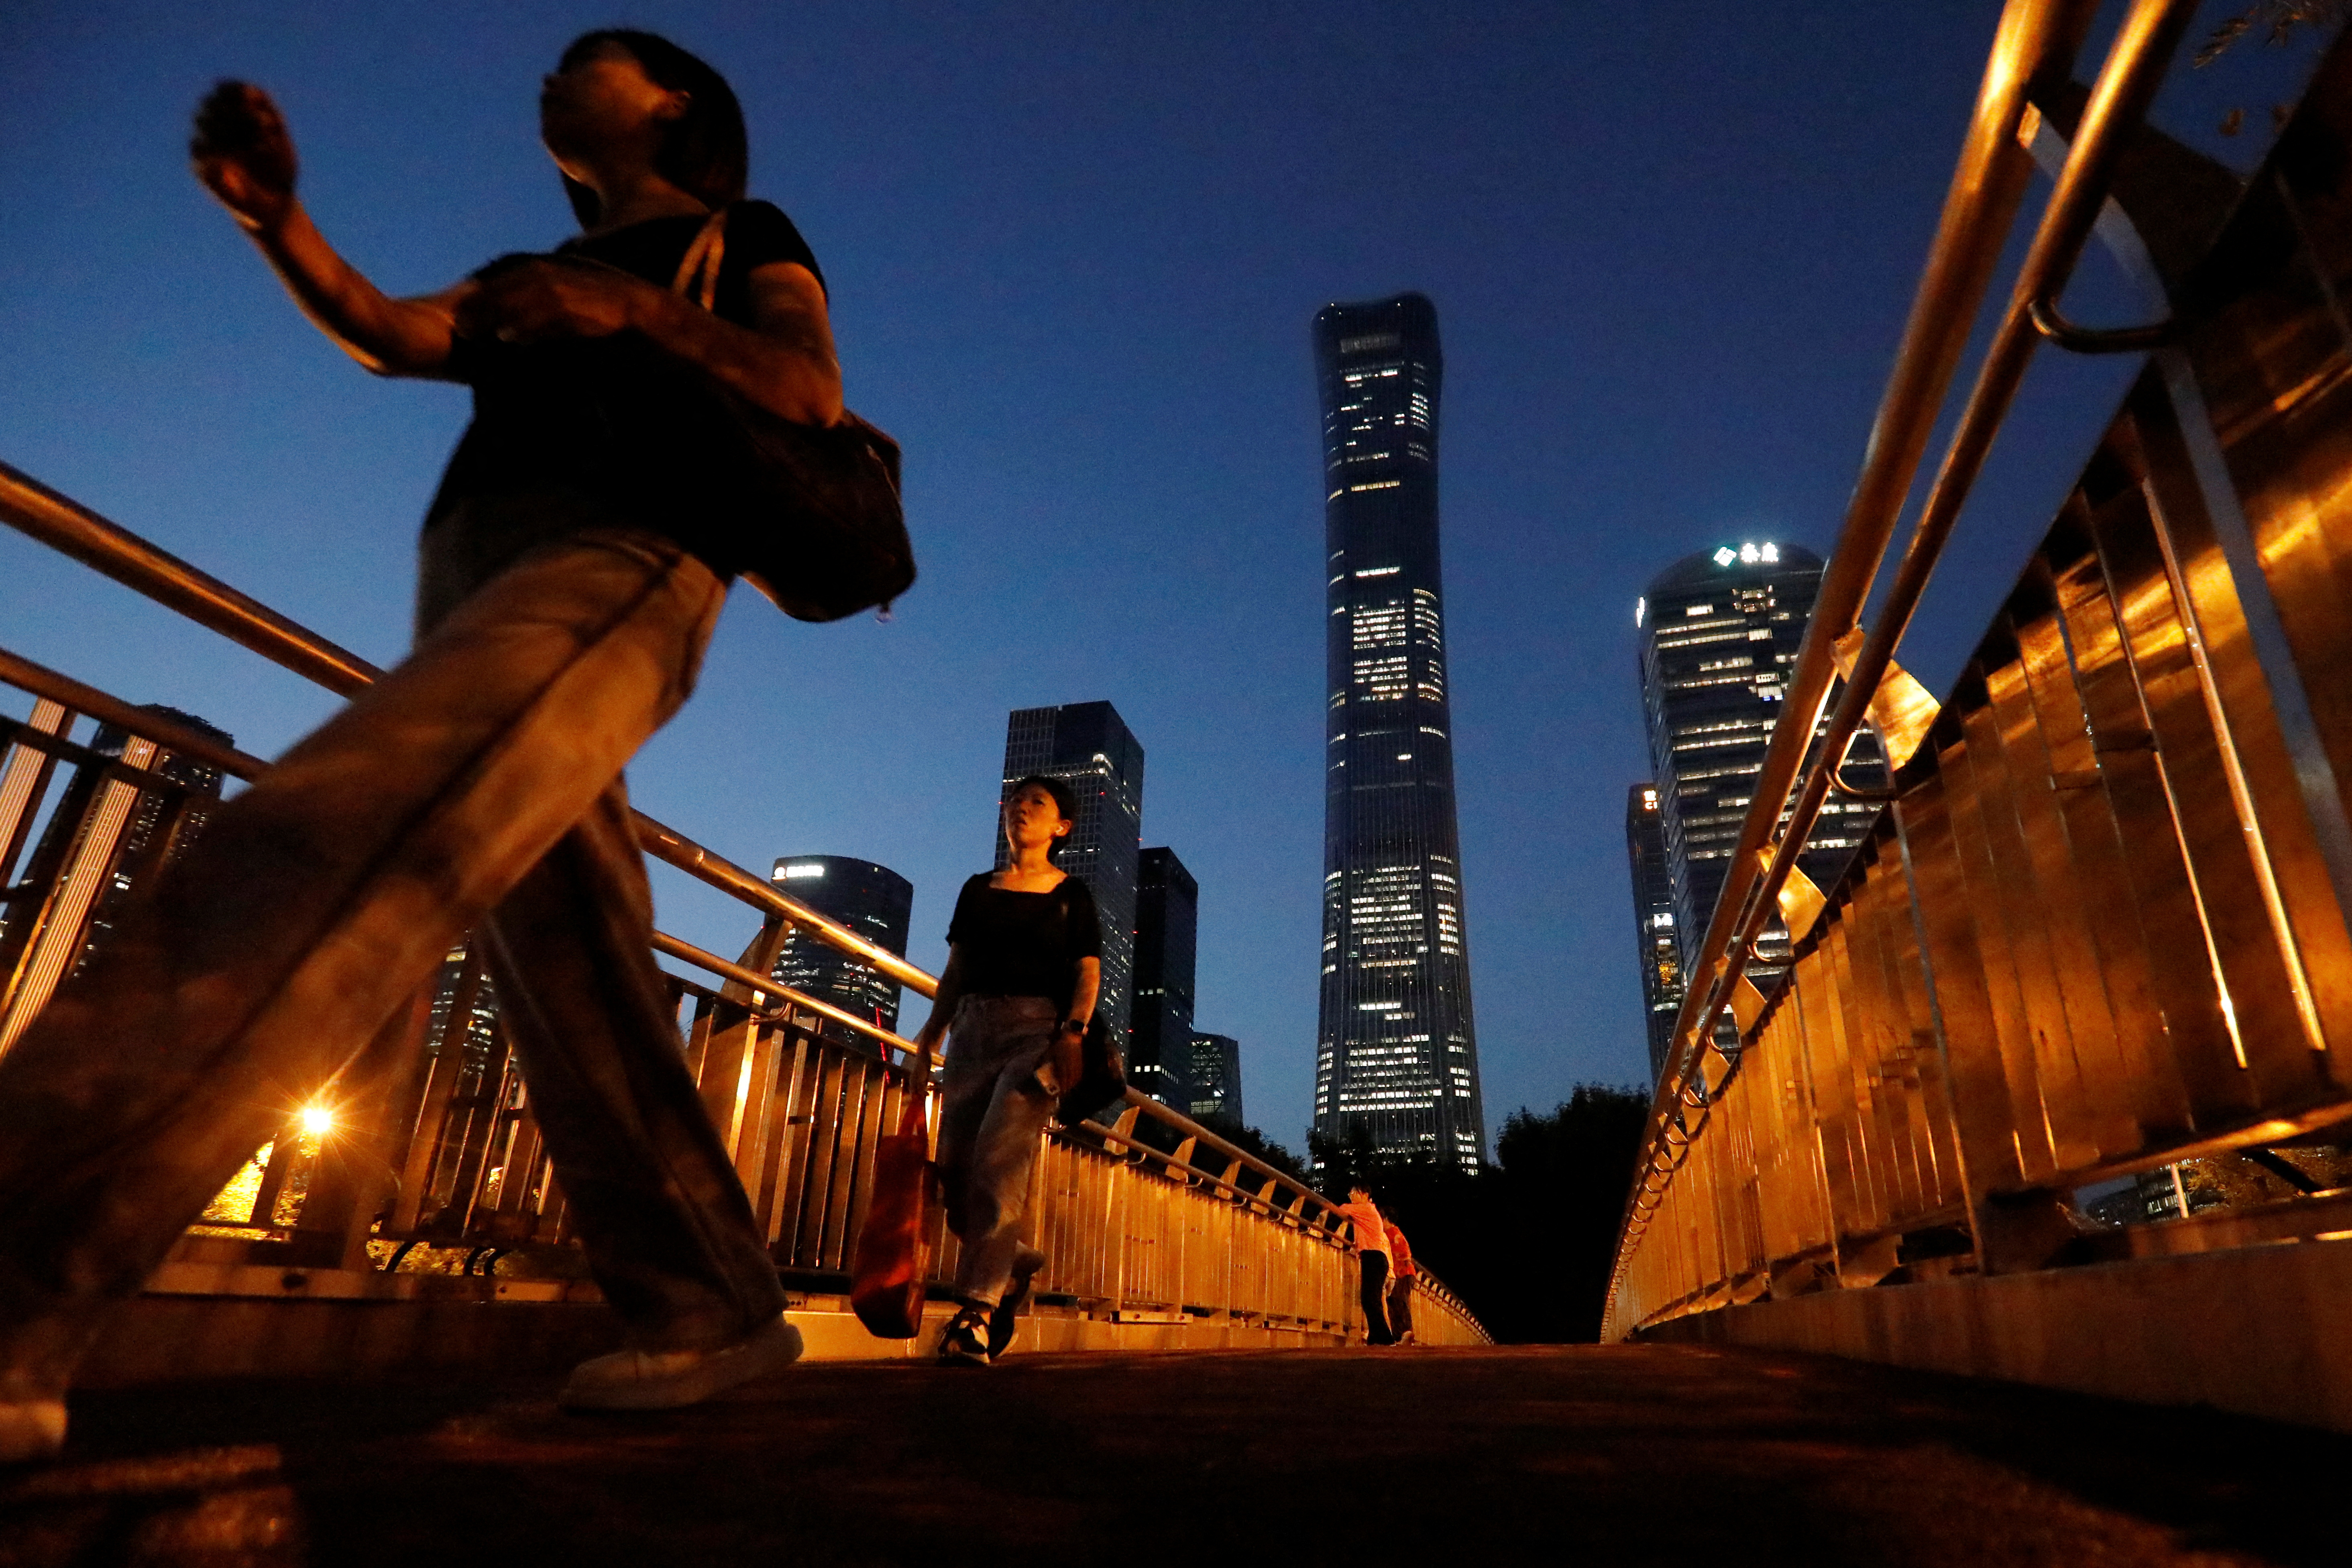 Pedestrians walk on an overpass near skyscrapers at the Central Business District in Beijing